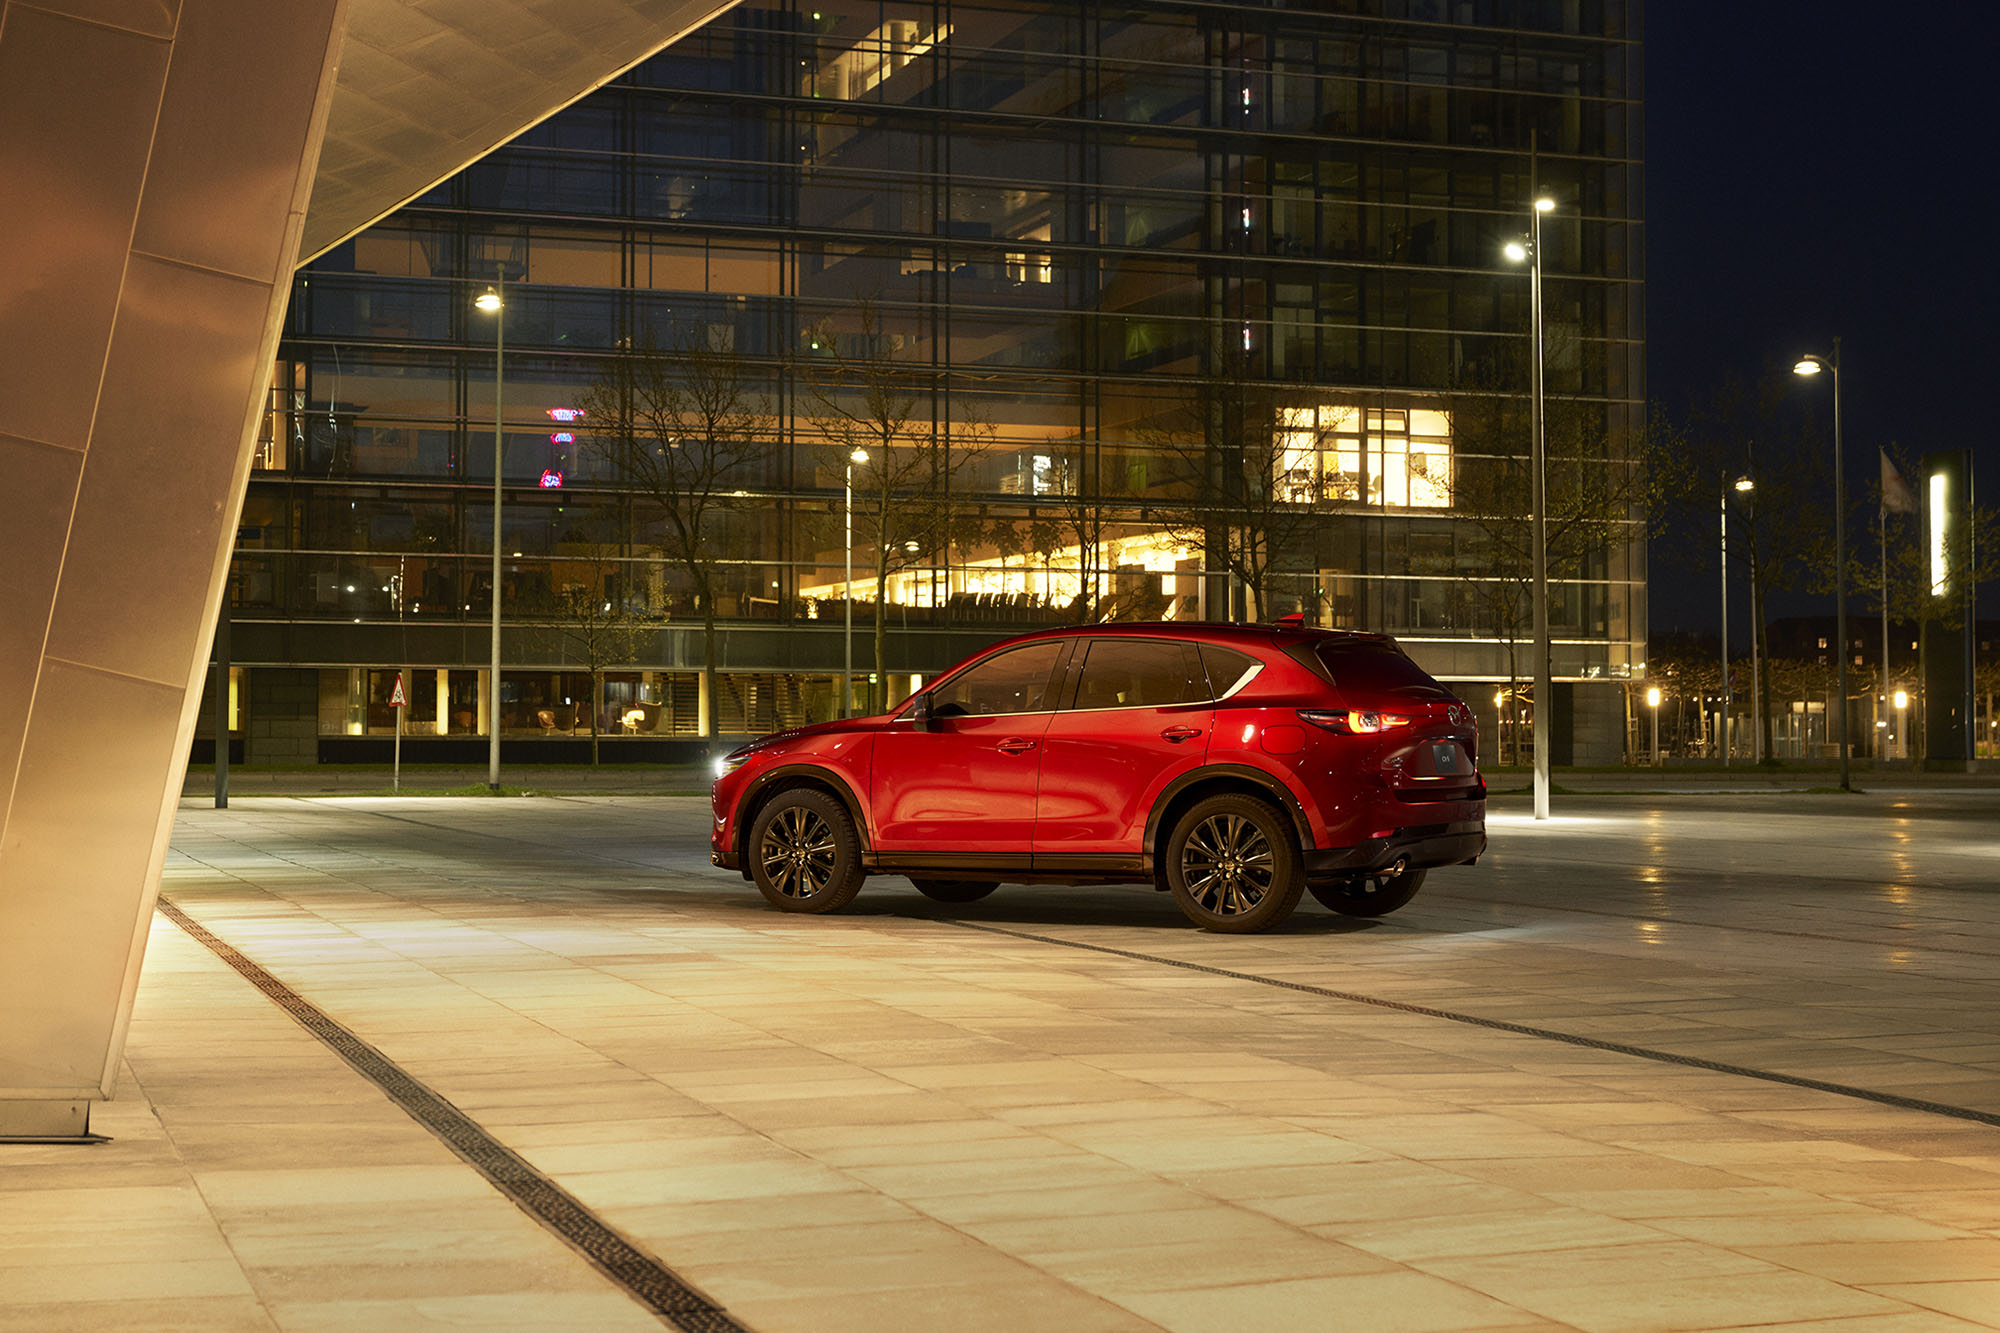 2023 Mazda CX-5 in red, rear-side view